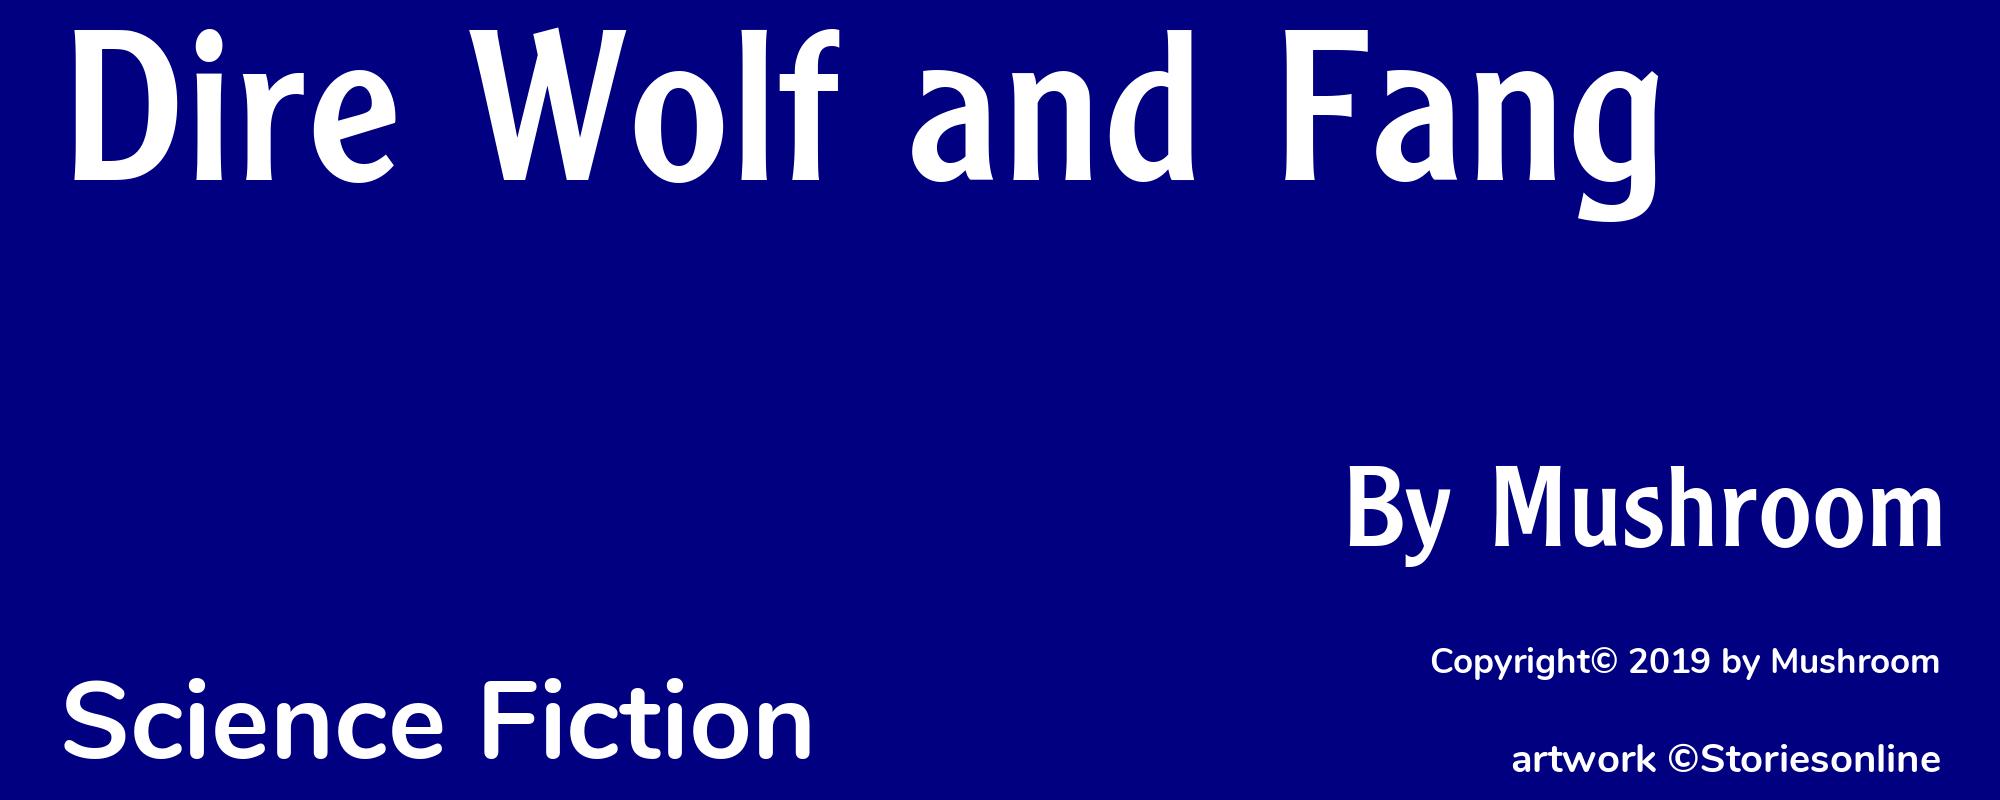 Dire Wolf and Fang - Cover